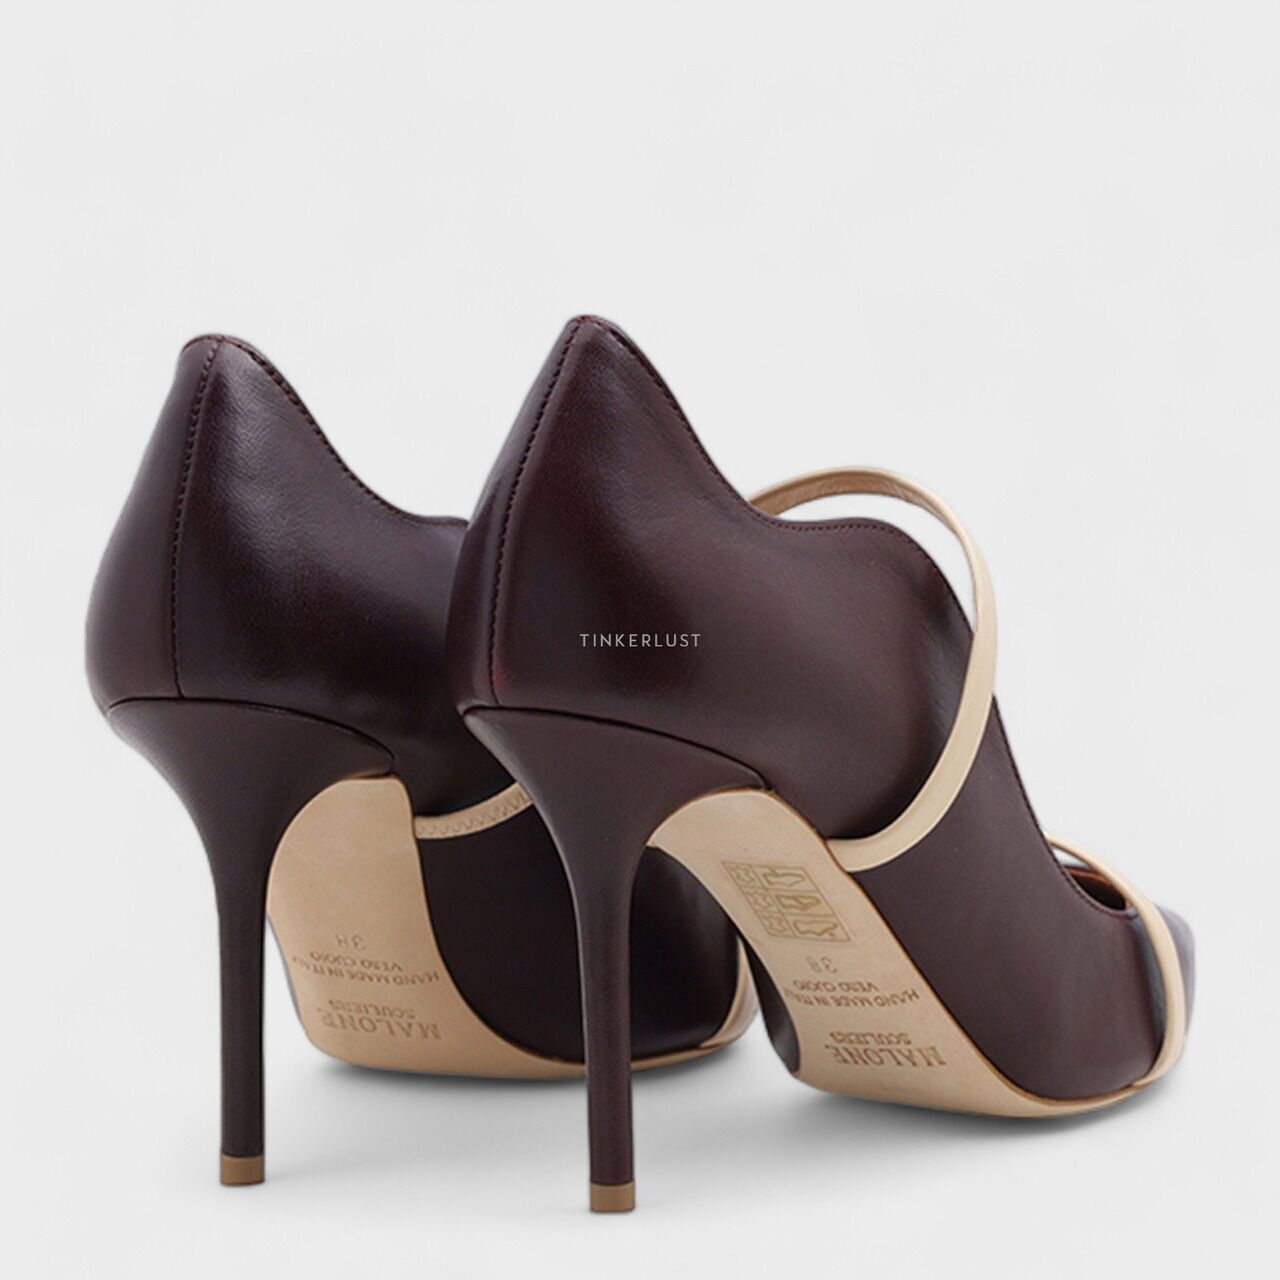 Malone Souliers Maureen Heeled Pumps 85mm in Chocolate/Butter